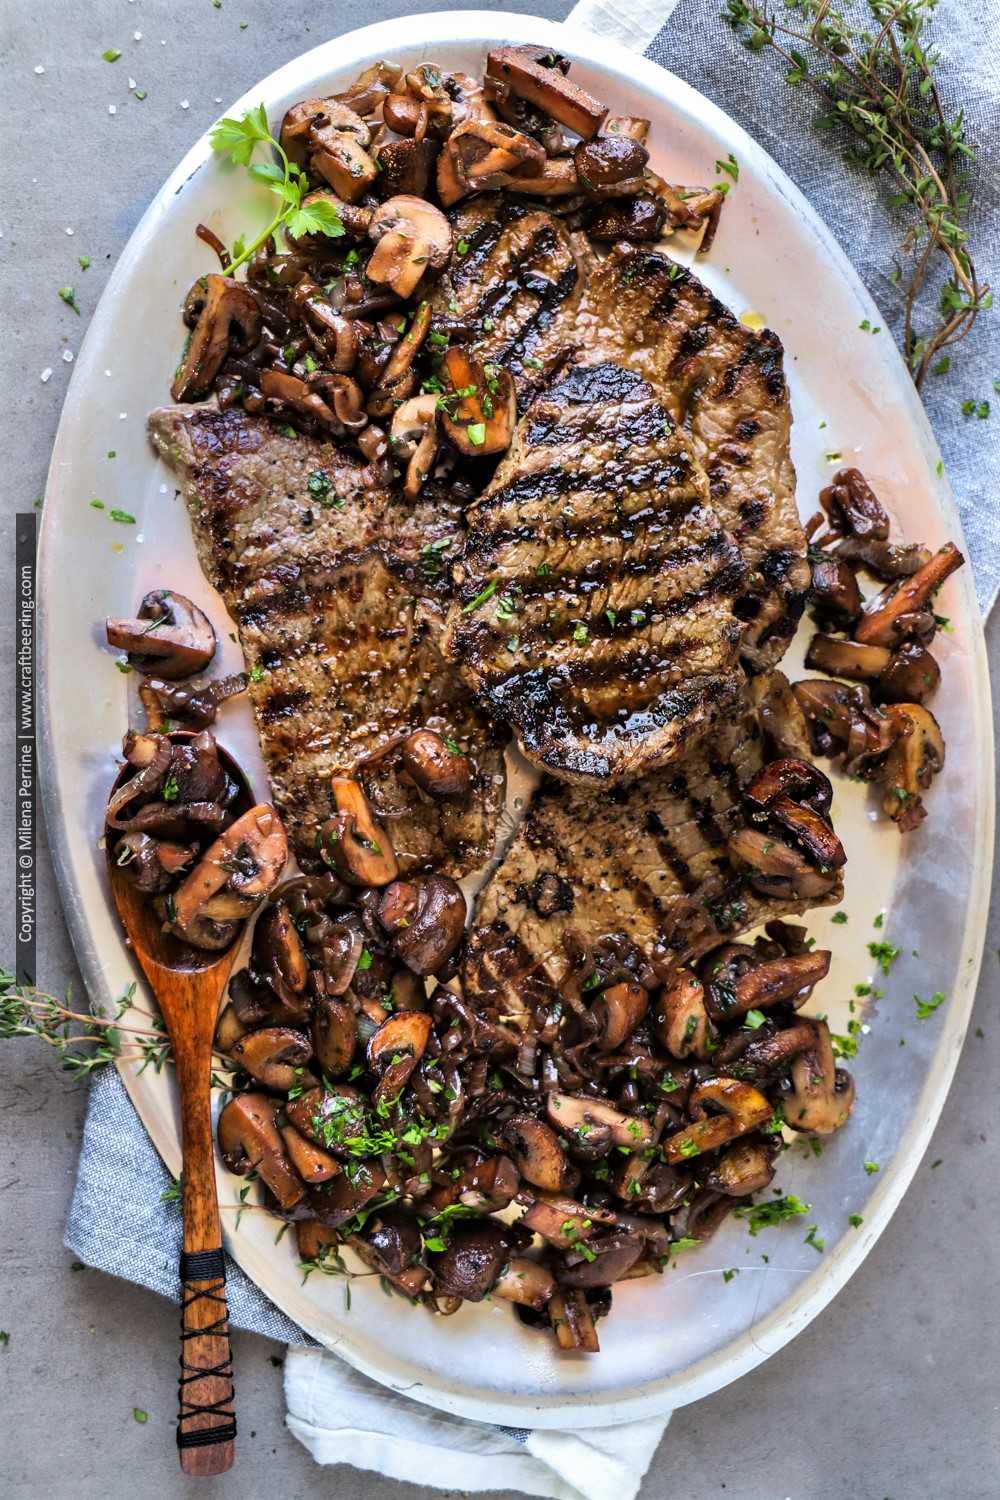 Steak with sauteed mushrooms and onions.